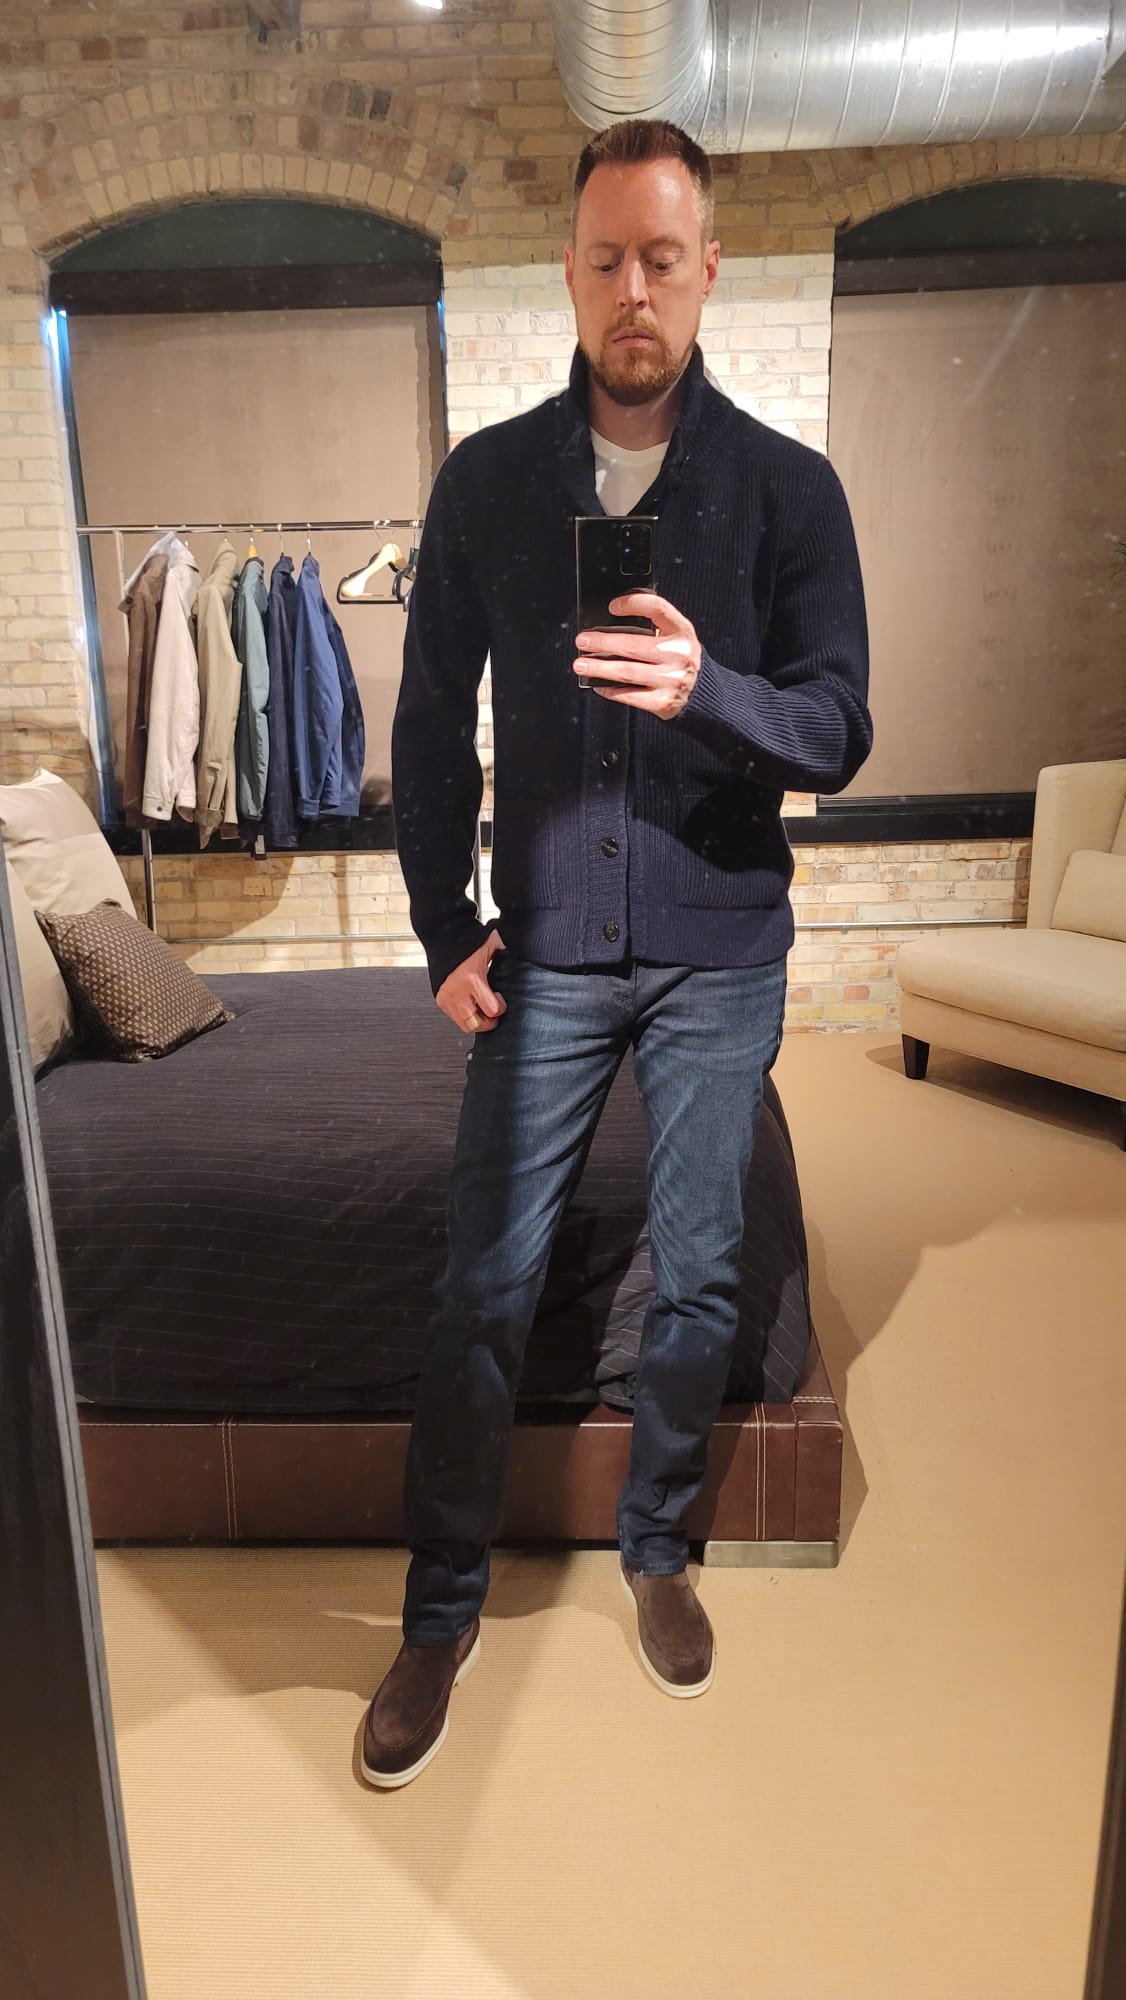 Insights: How to wear jeans with a sport coat and tie - After the Suit